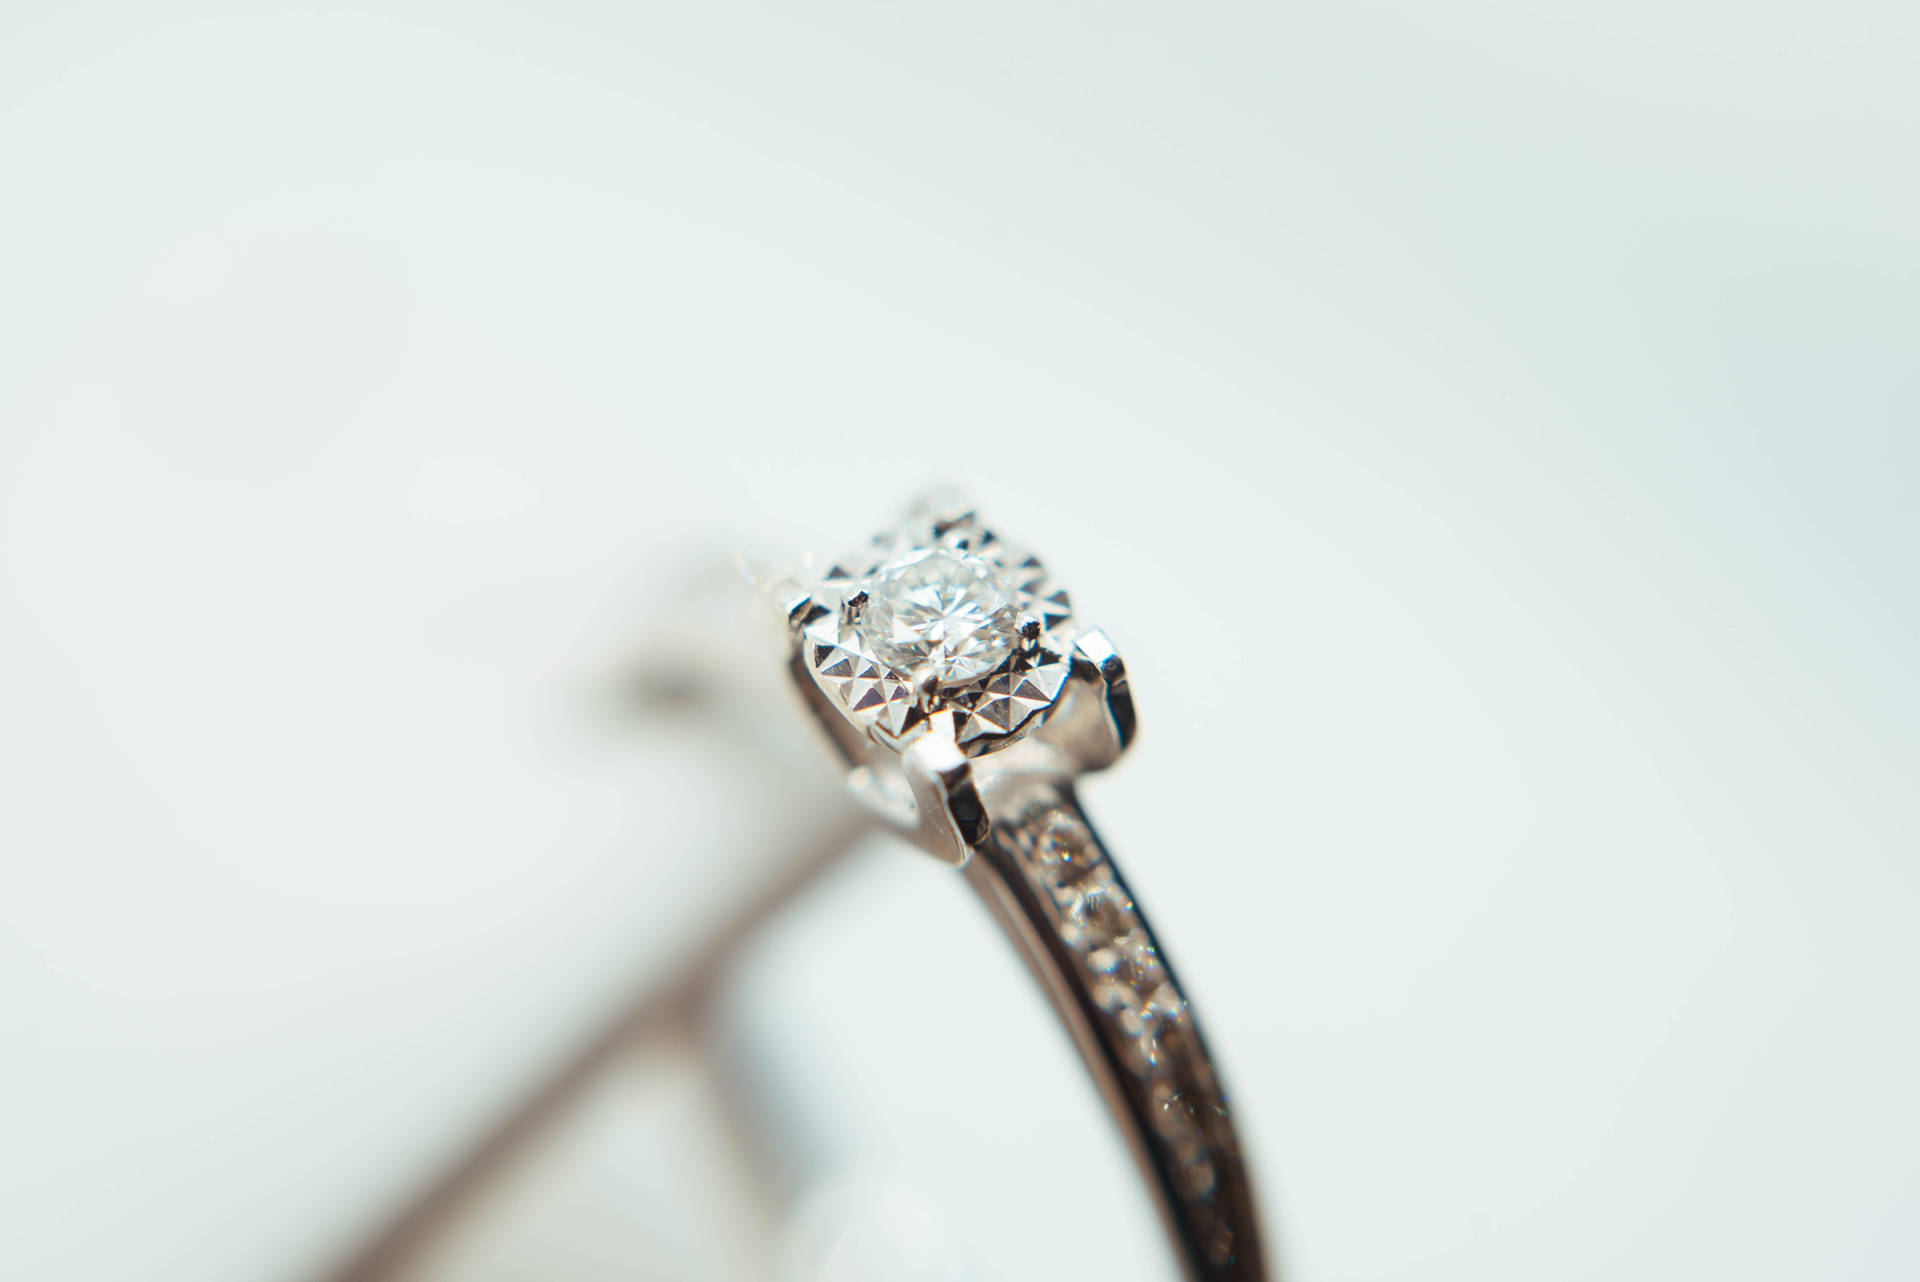 6016X4016 Wedding Rings Wallpaper and Background